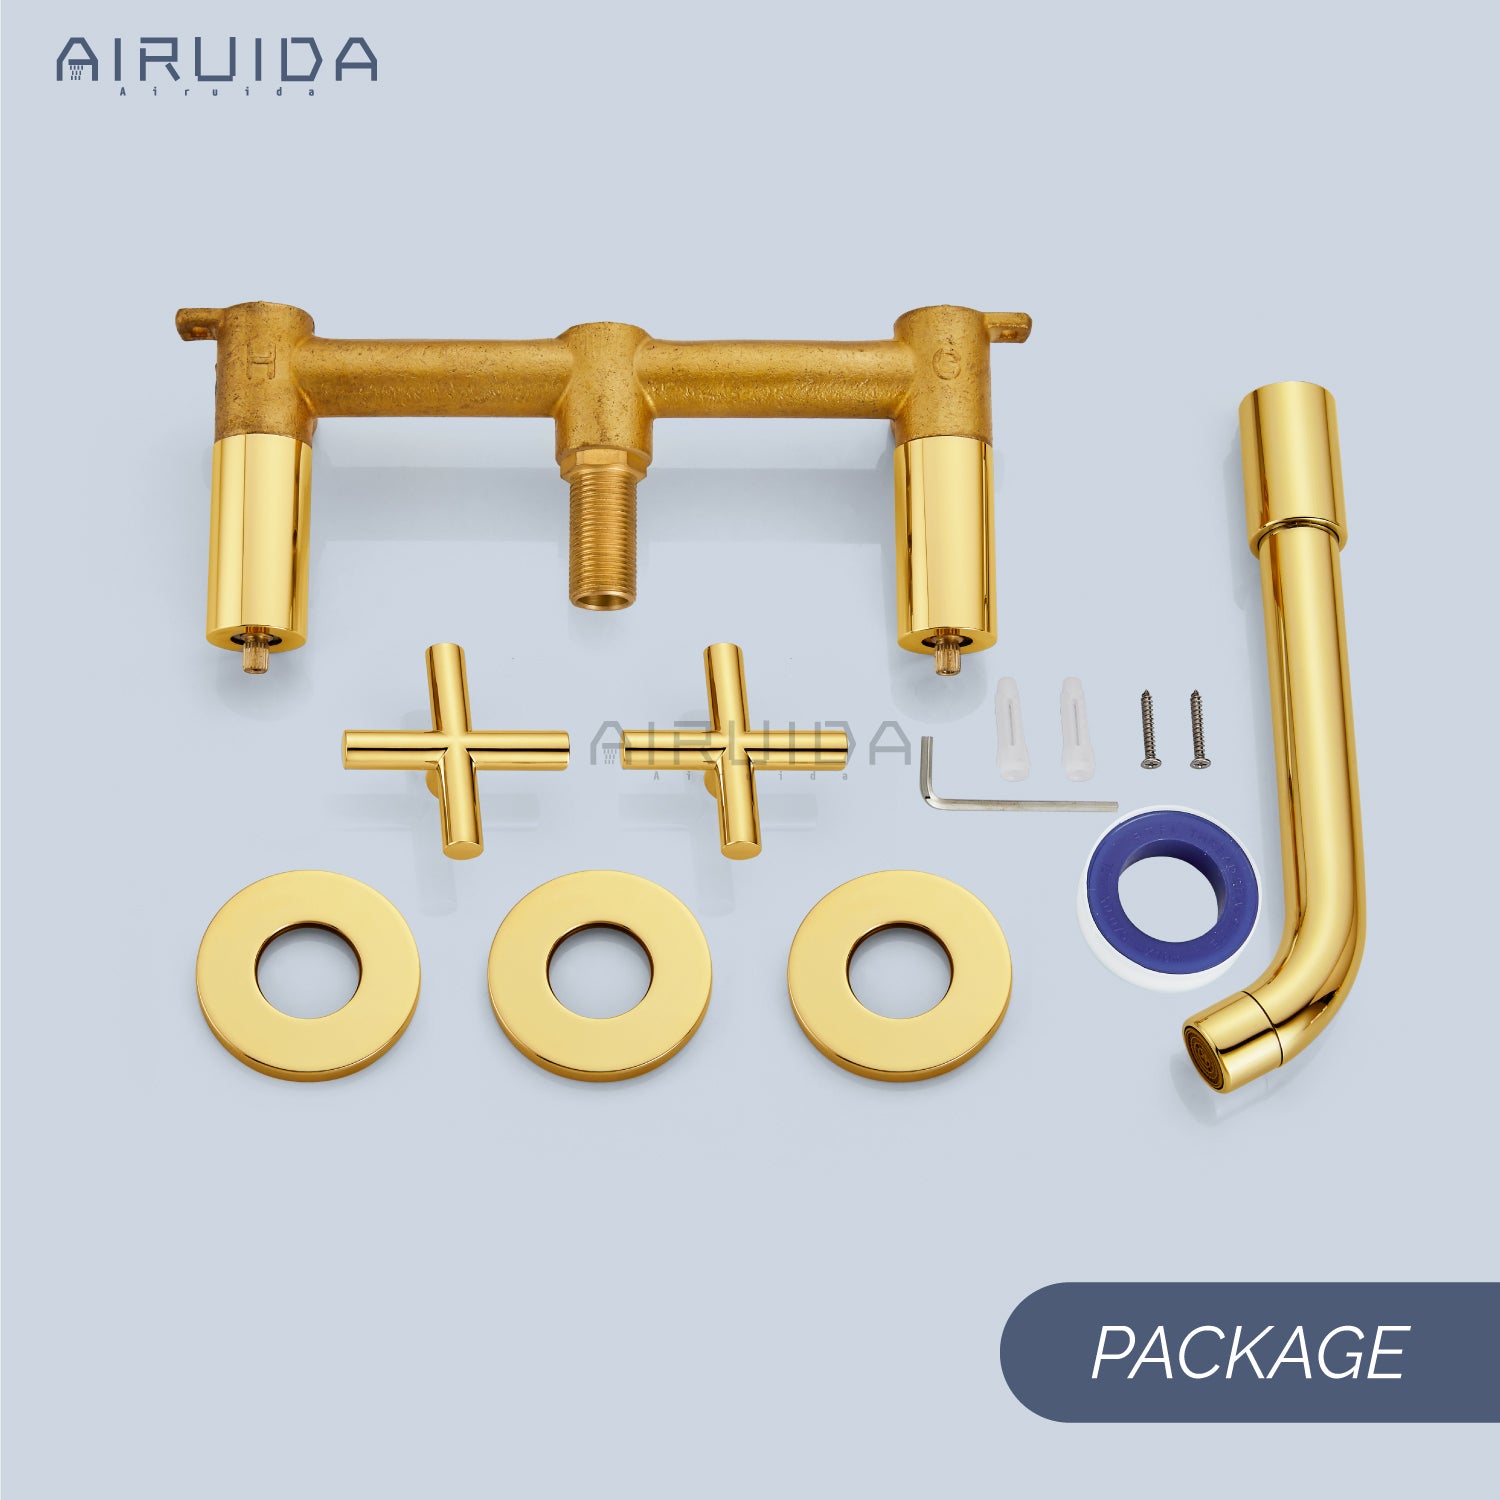 Airuida Wall Mount Bathroom Faucet Solid Brass Widespread Bathroom 360 Swivel Spout Sink Faucet Double Handles Lavatory Basin Sink Mixing Faucet with Rough in Valve